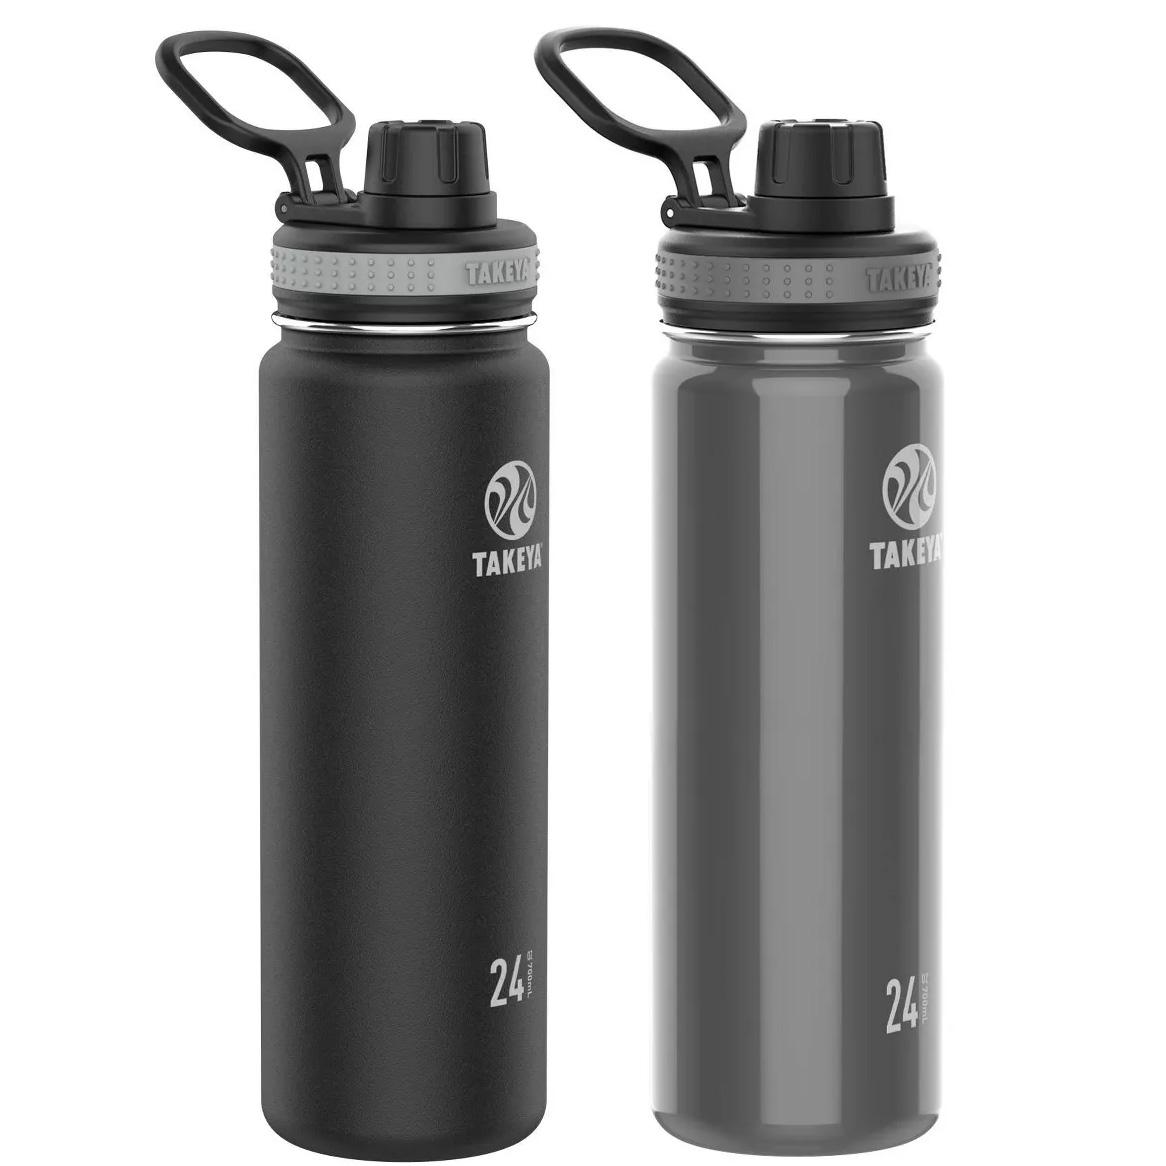 2 Takeya Originals Stainless Steel Water Bottle with Spout Lid for $17.50